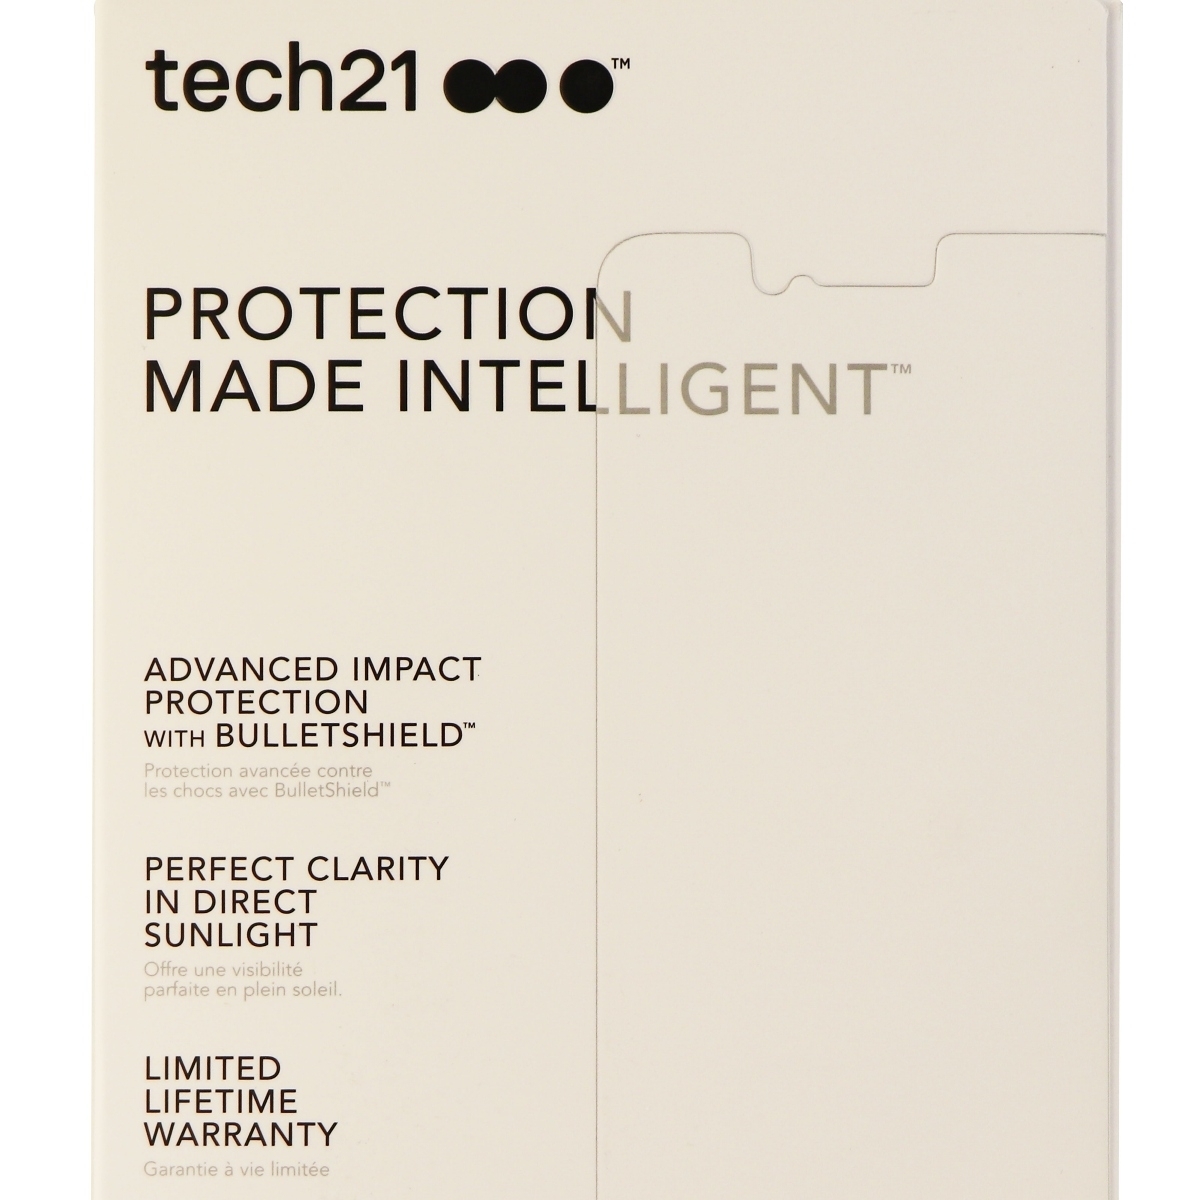 Tech21 Impact Shield With Anti-Glare Screen Protector For IPhone 7 - Clear